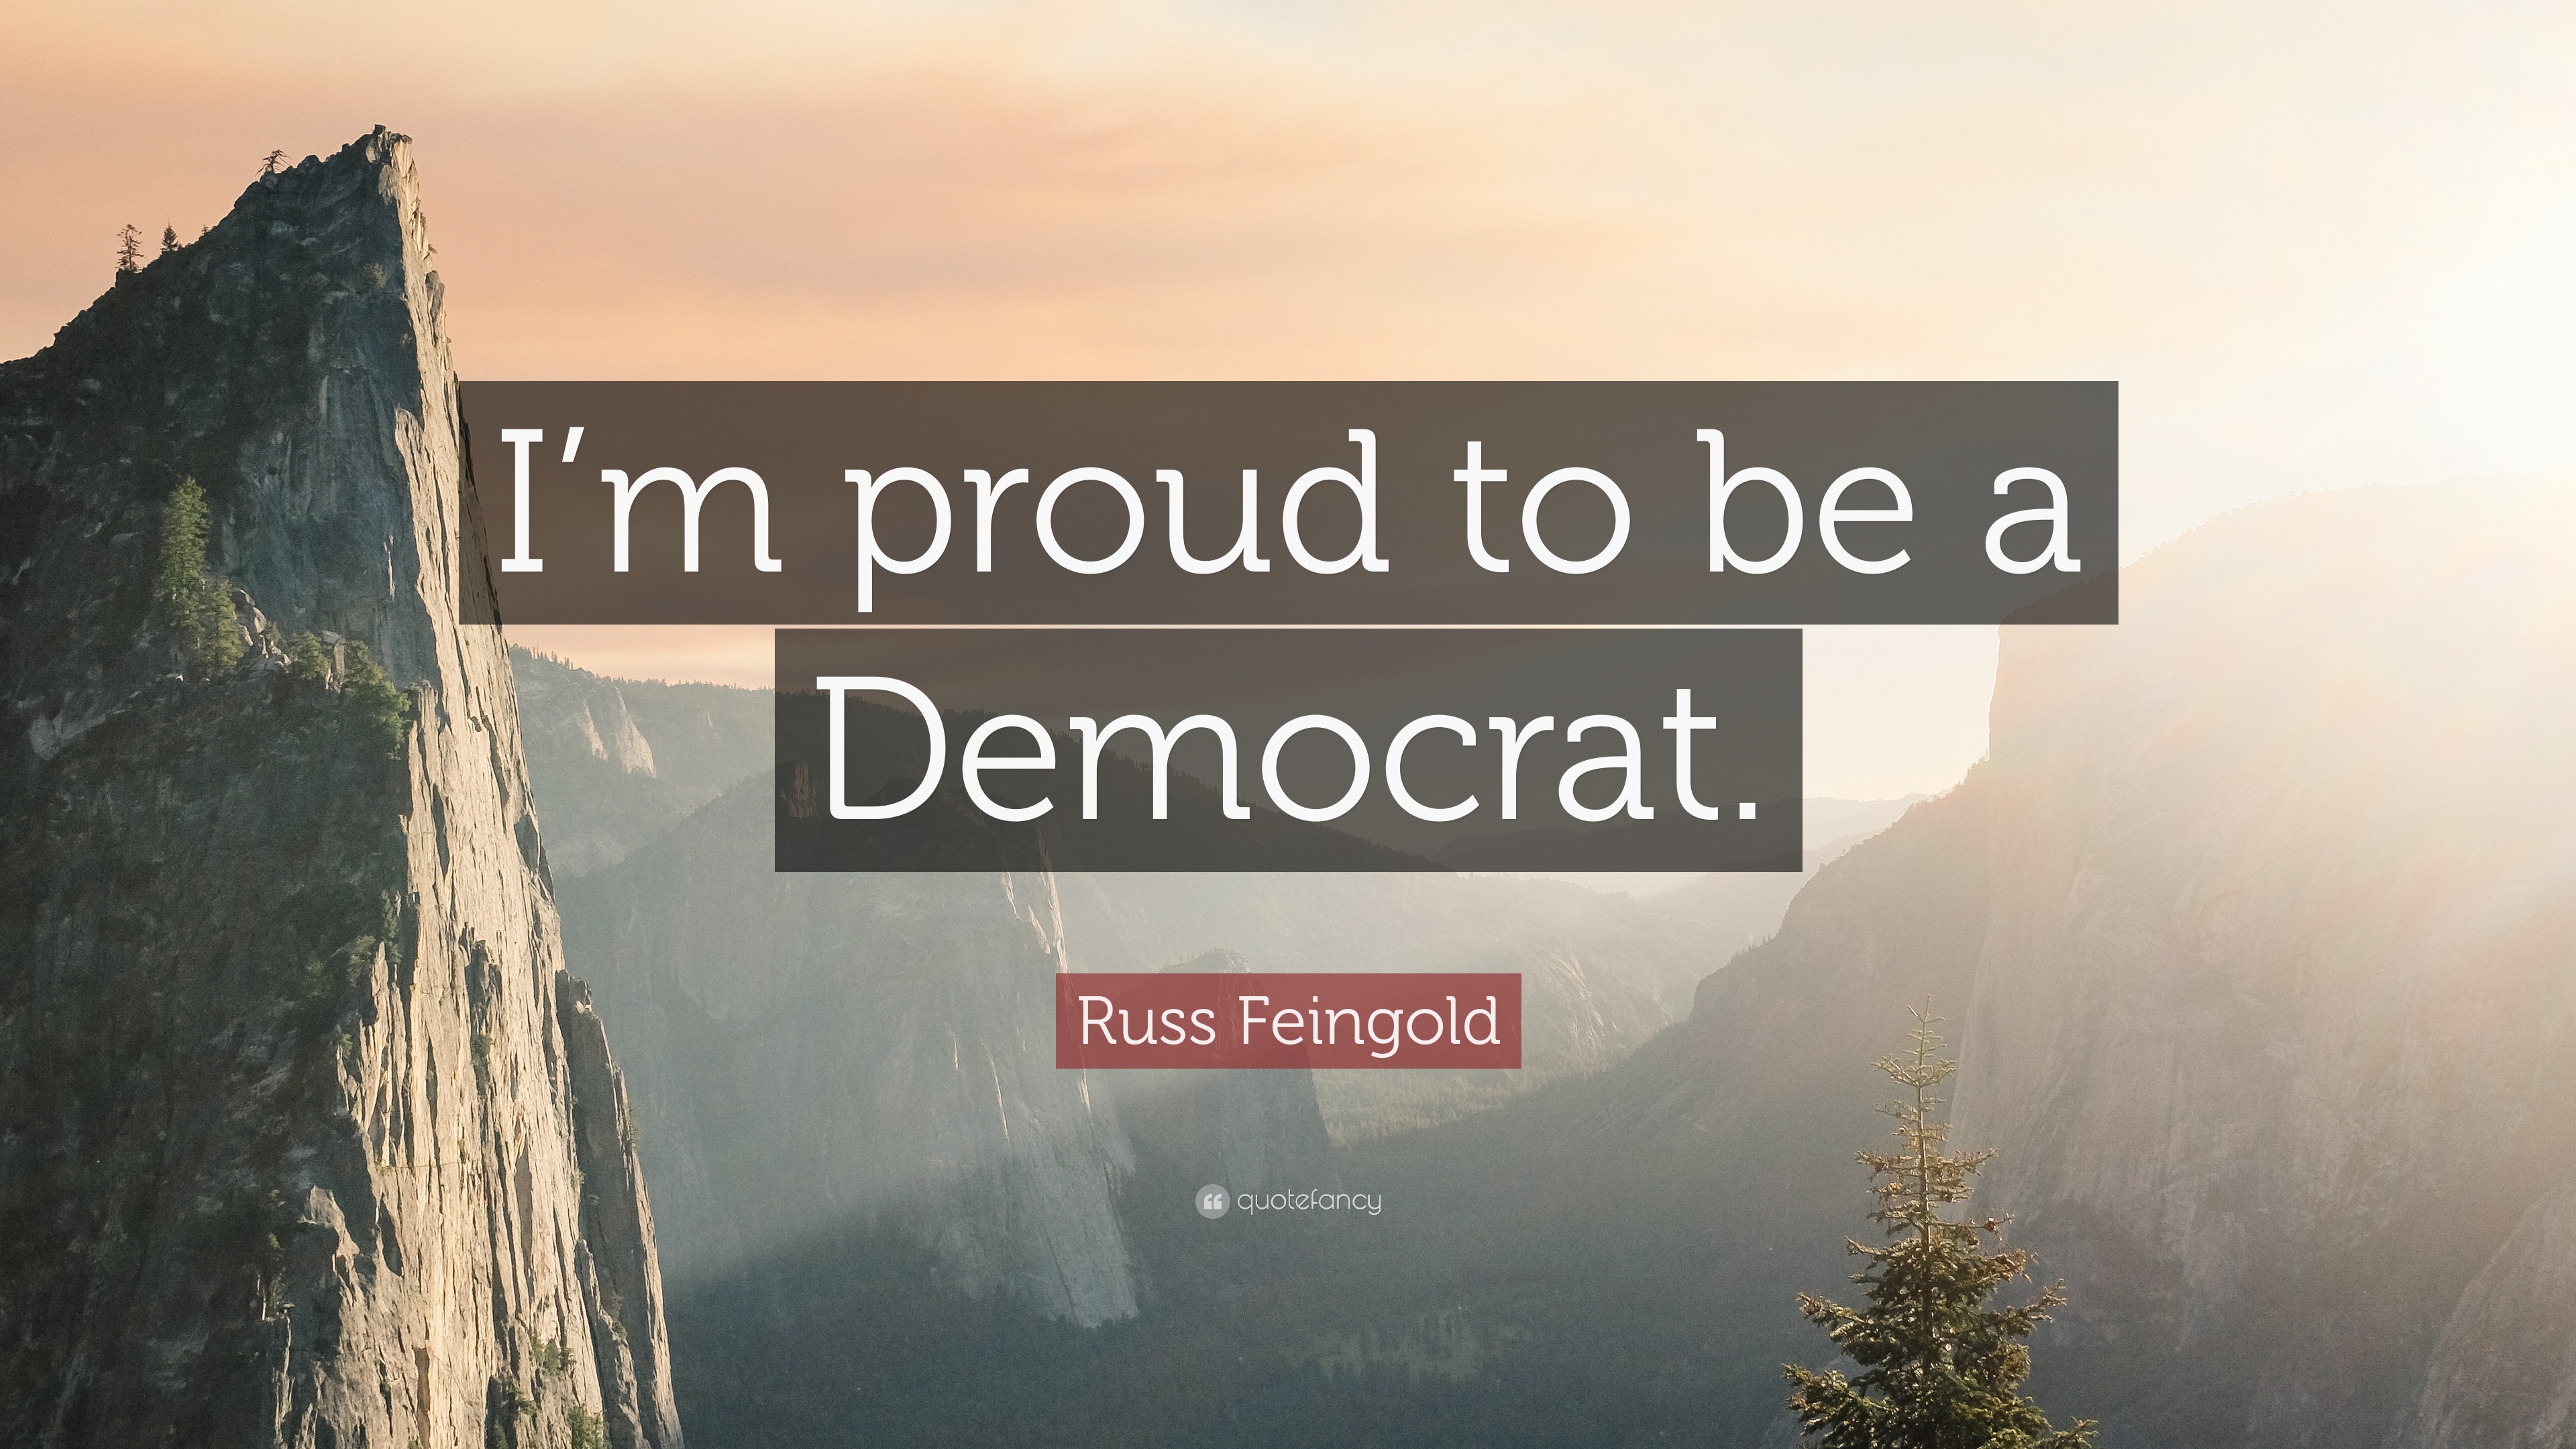 Russ Feingold Quote: “I'm proud to be a Democrat.” 12